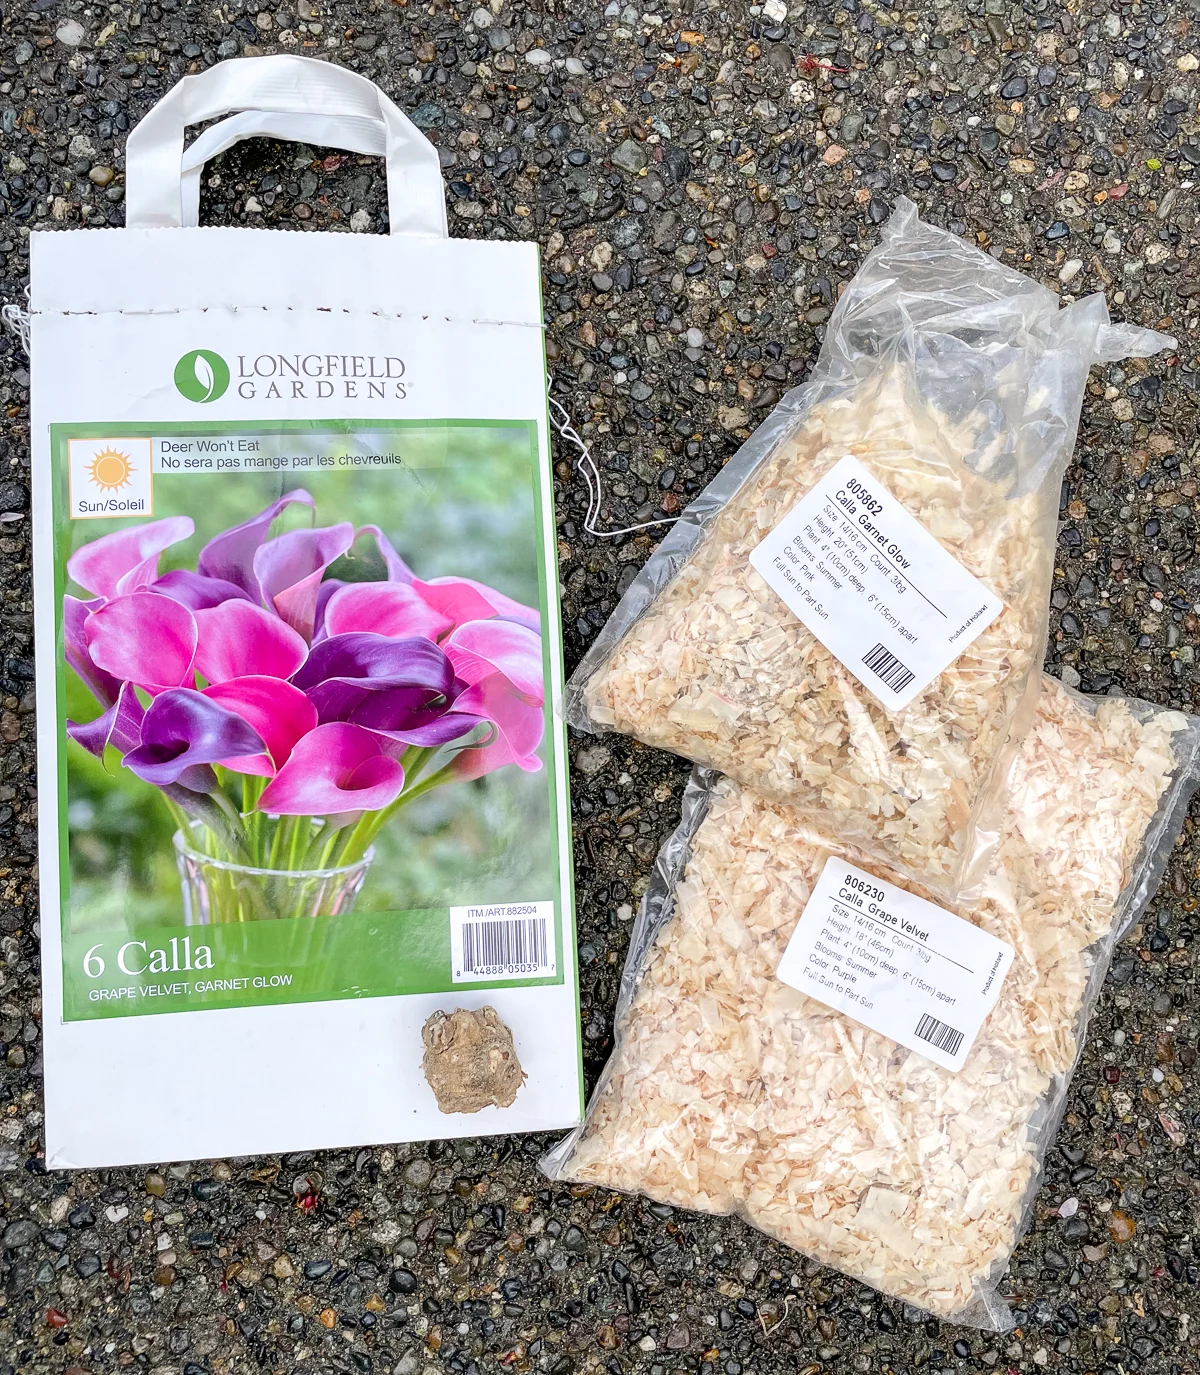 Longfield Gardens bag of calla lily bulbs from Costco